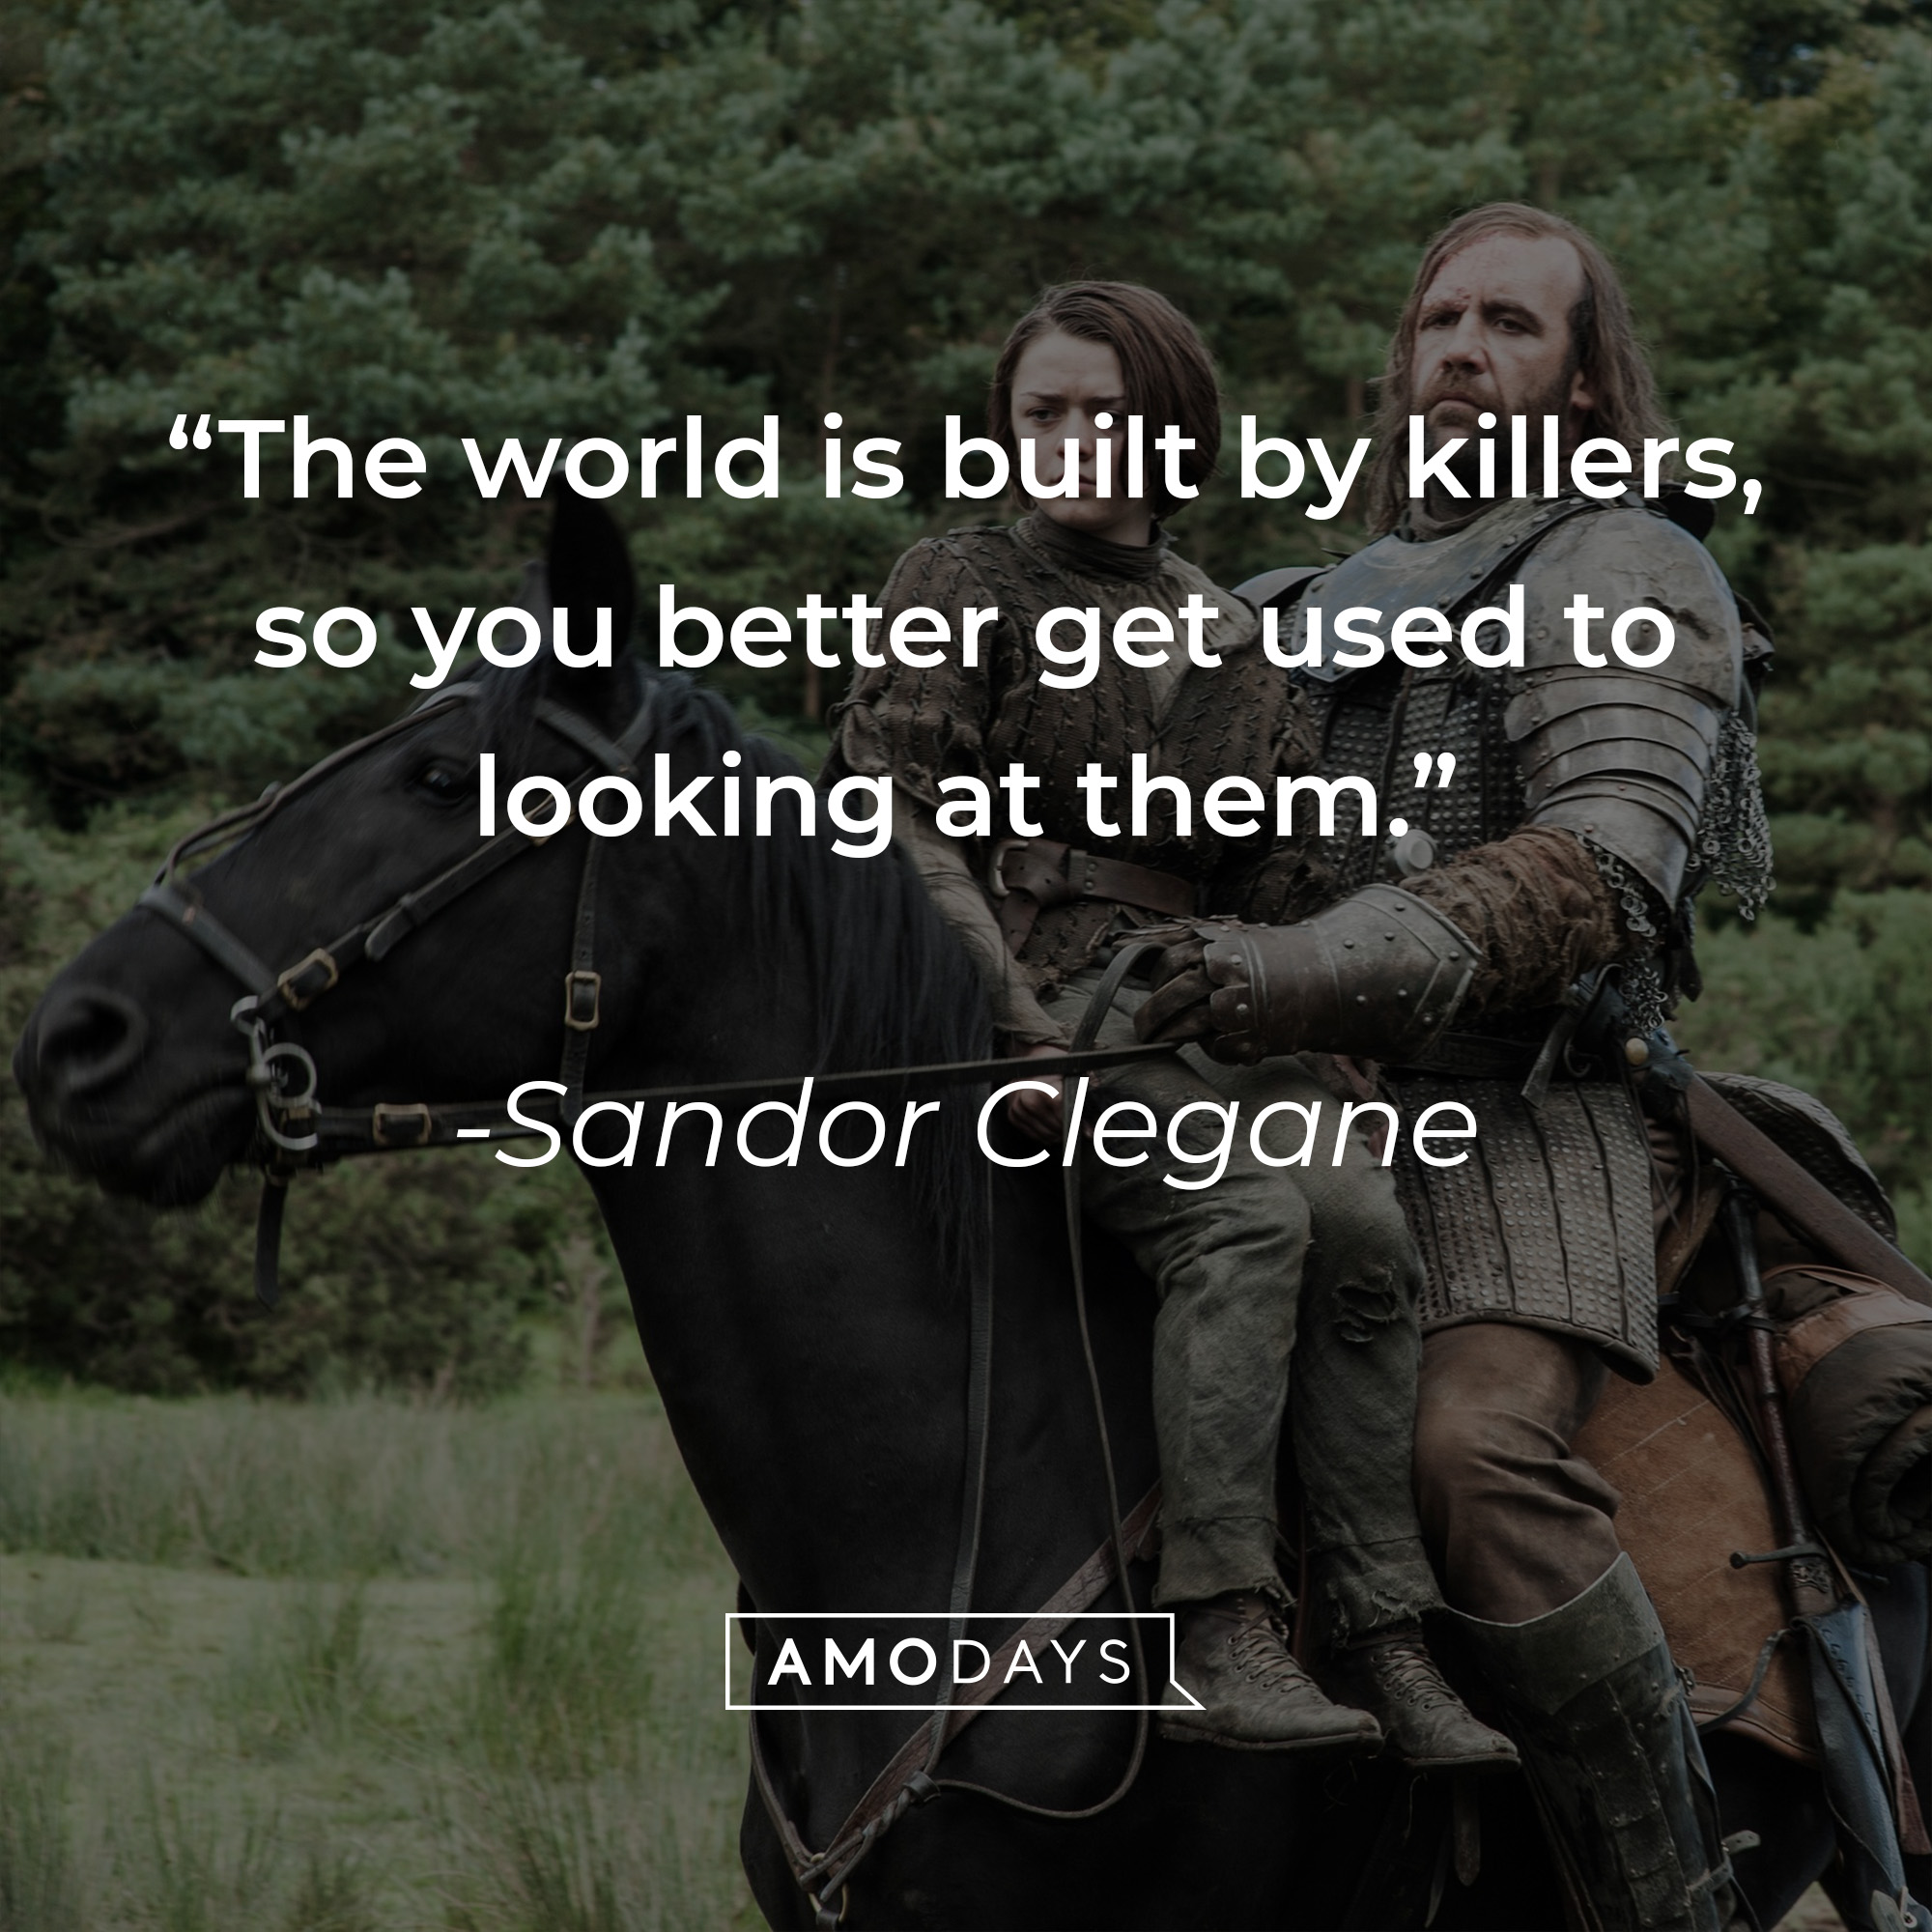 Sandor Clegane's quote: "The world is built by killers, so you better get used to looking at them." | Source: facebook.com/GameOfThrones